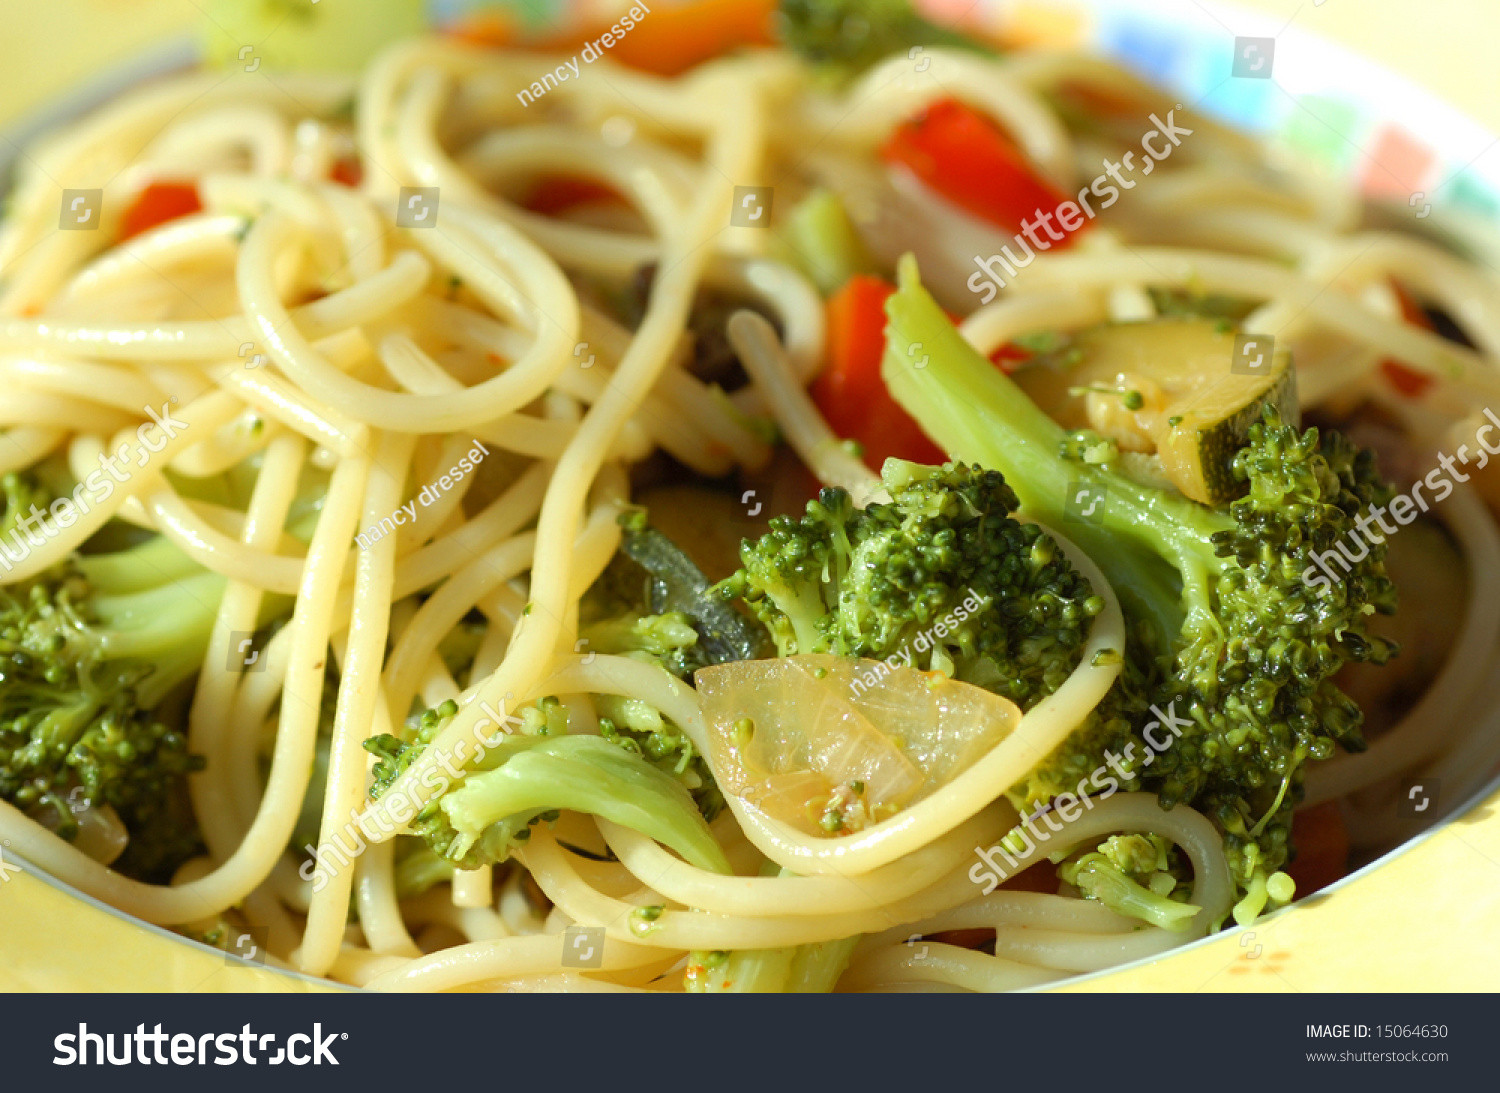 Healthy Spaghetti Noodles
 Low Fat Spaghetti Noodles With Delicious And Healthy